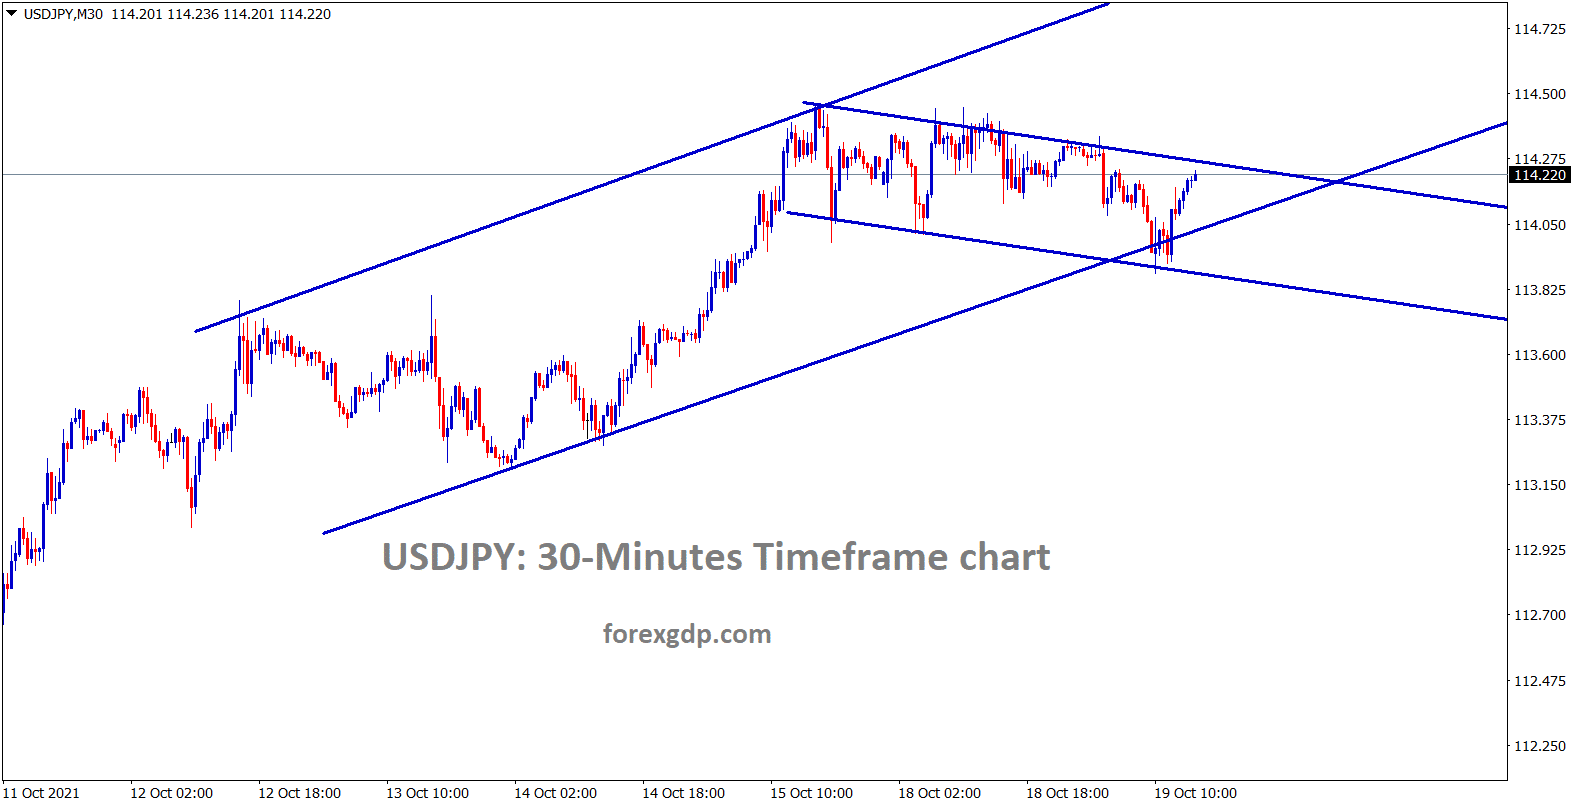 USDJPY is moving between the channel ranges